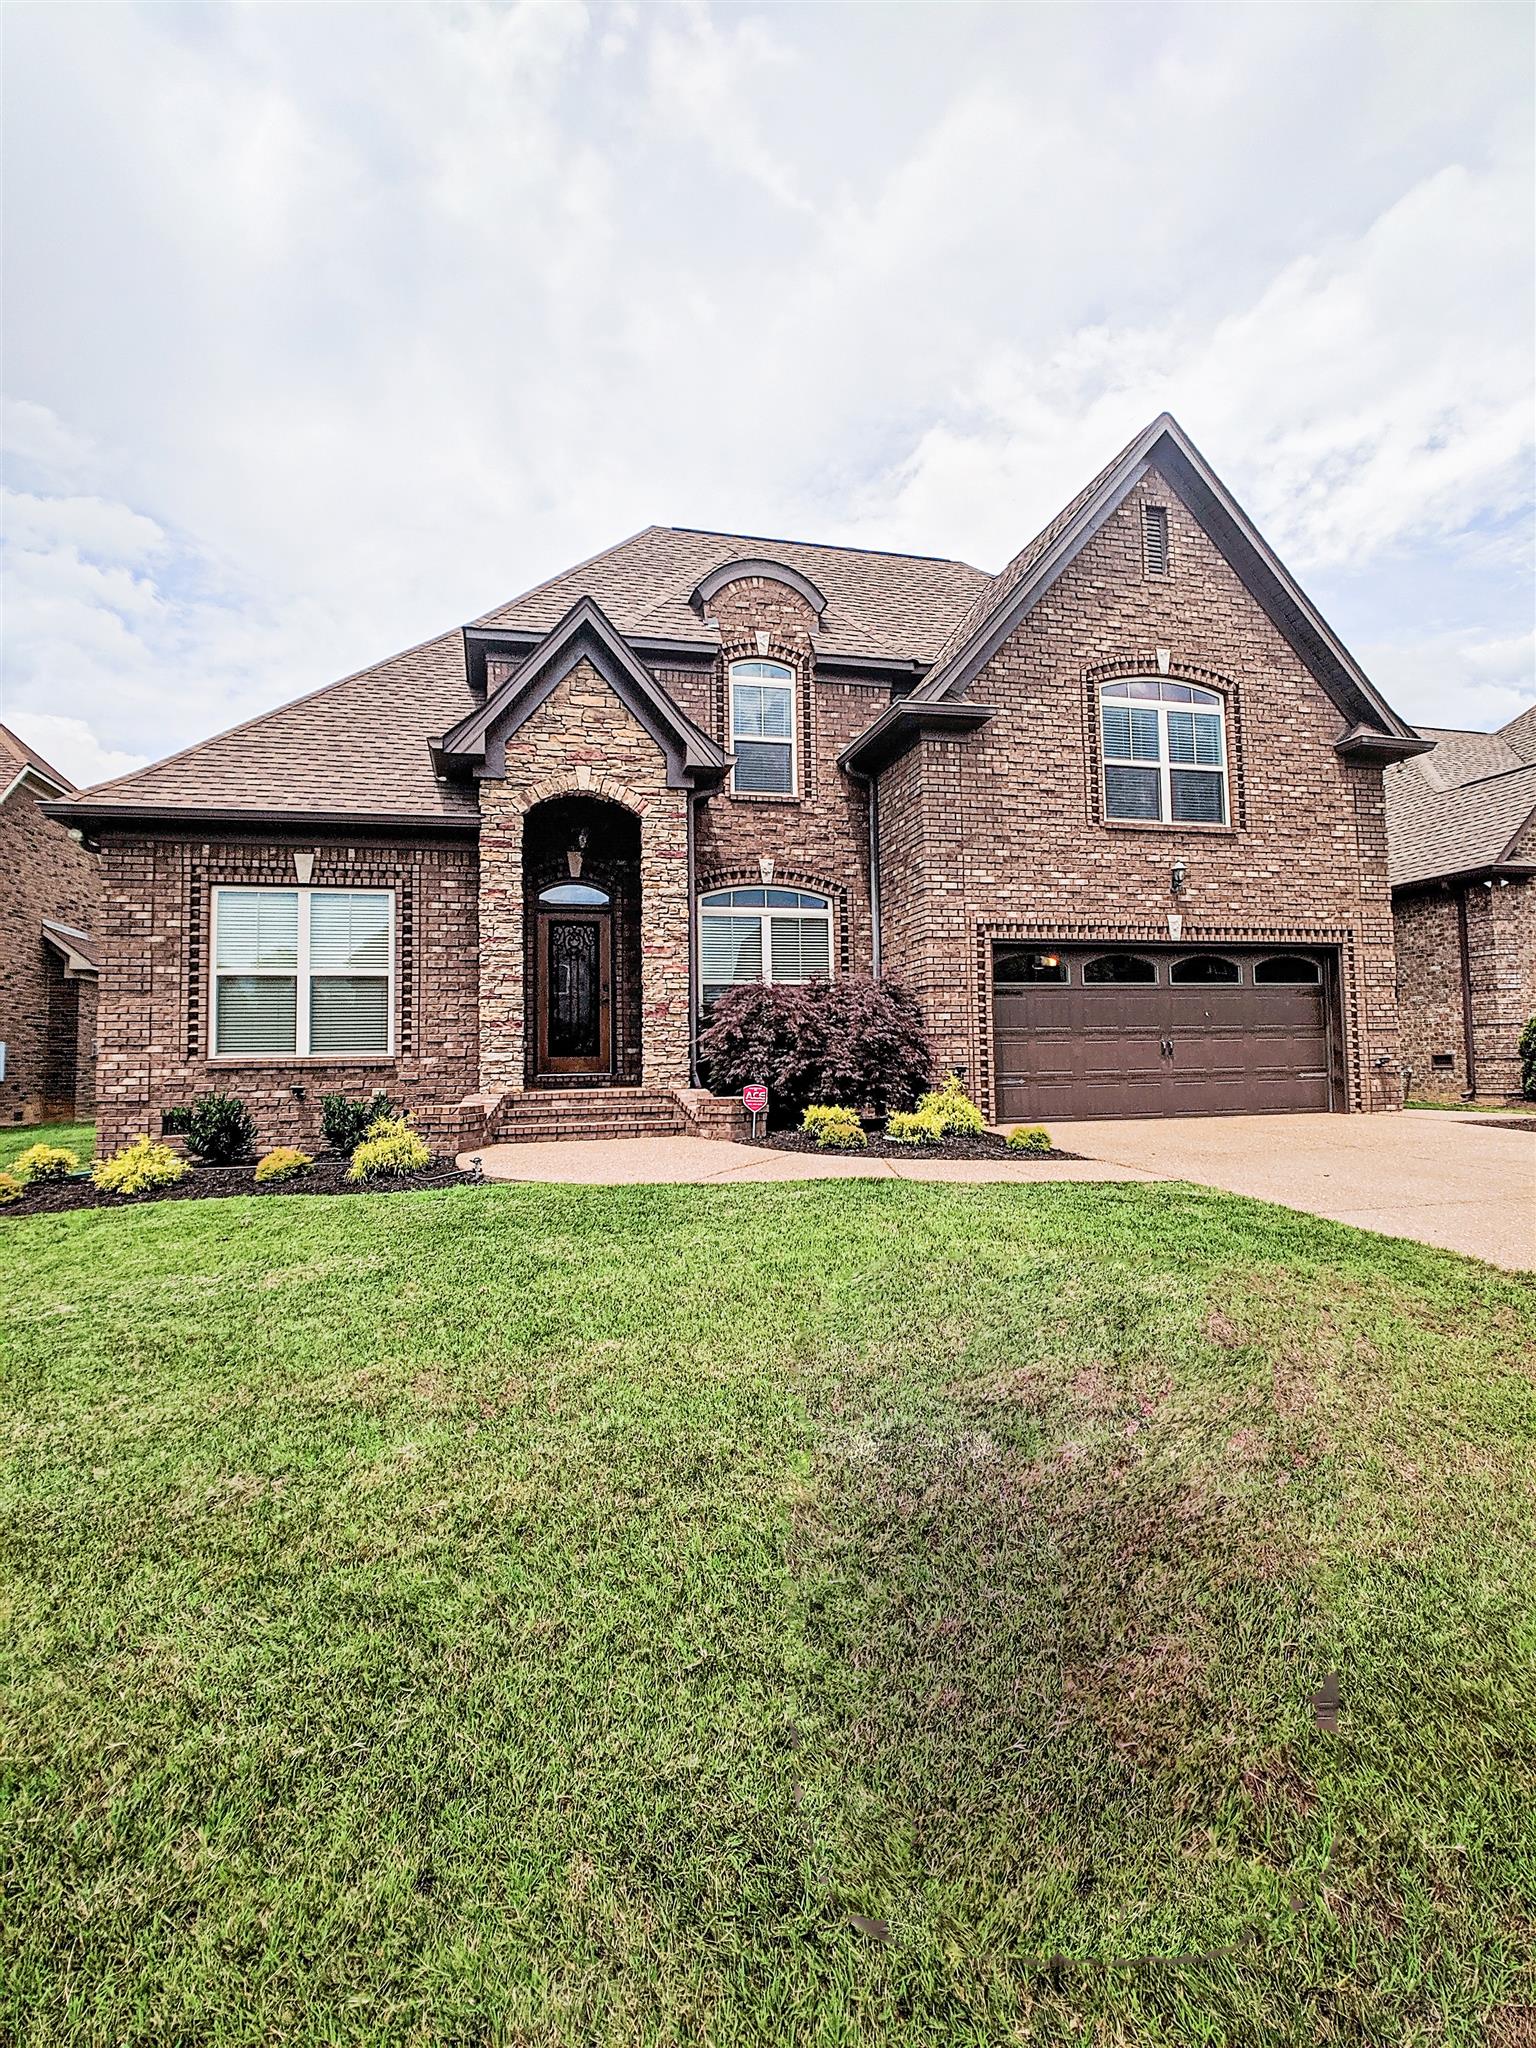 Welcome Home to 2009 Stonebrook Cir. All brick Universal built home in desirable Stonehollow subdivision